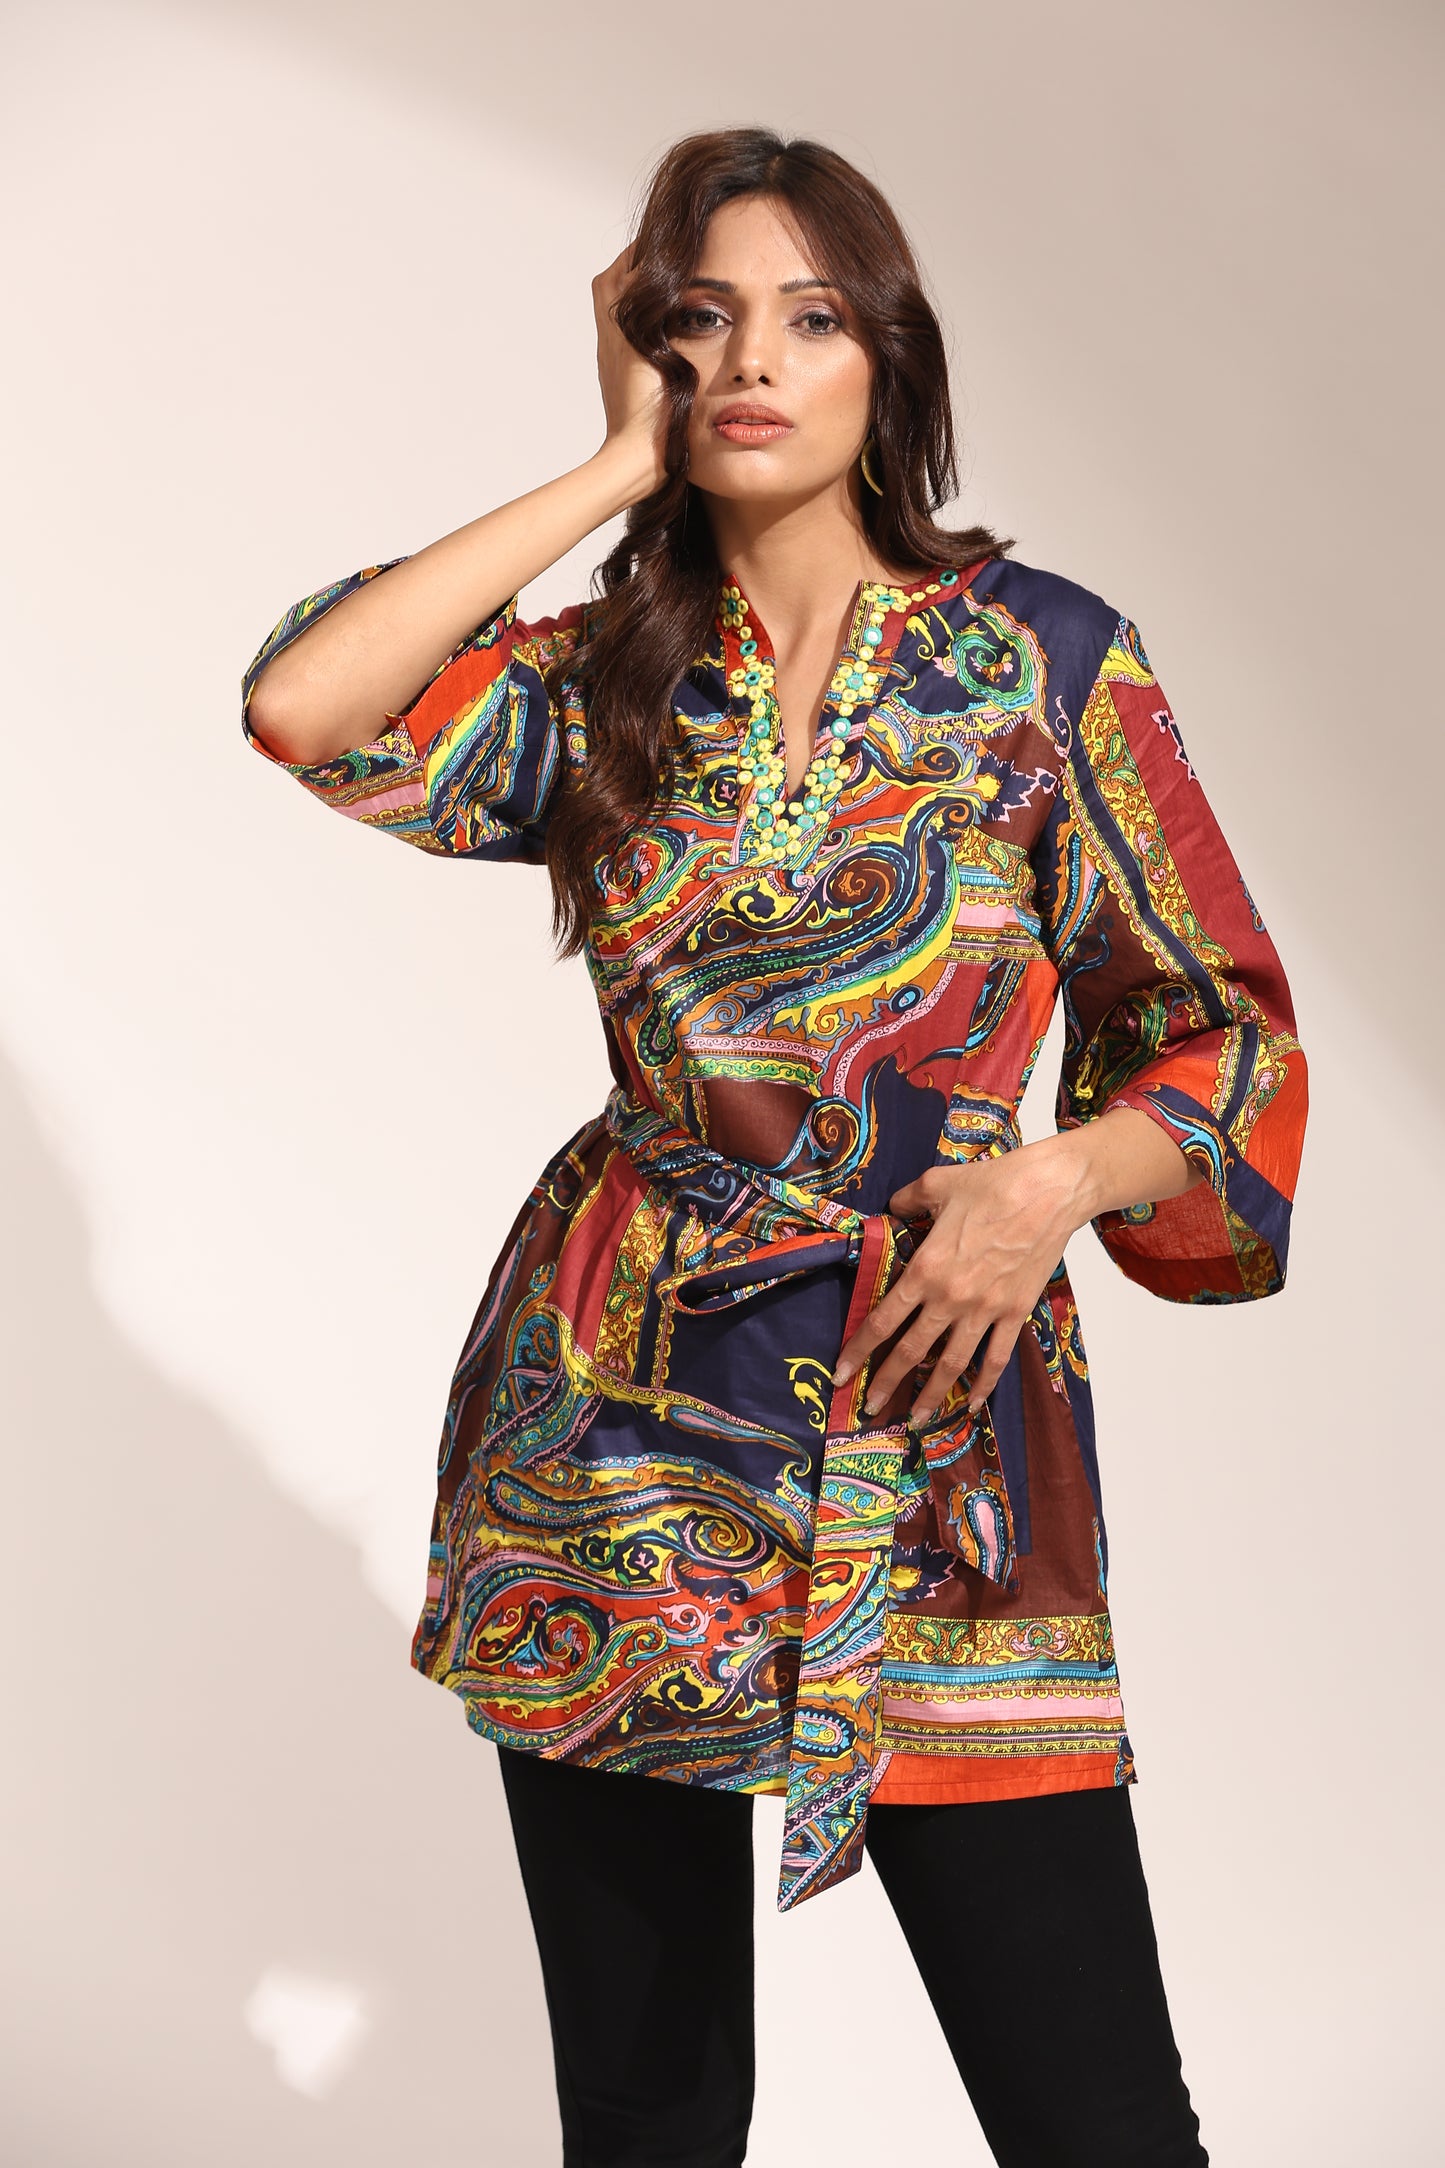 Mirror Embroidery Psychedelic Disco Dress